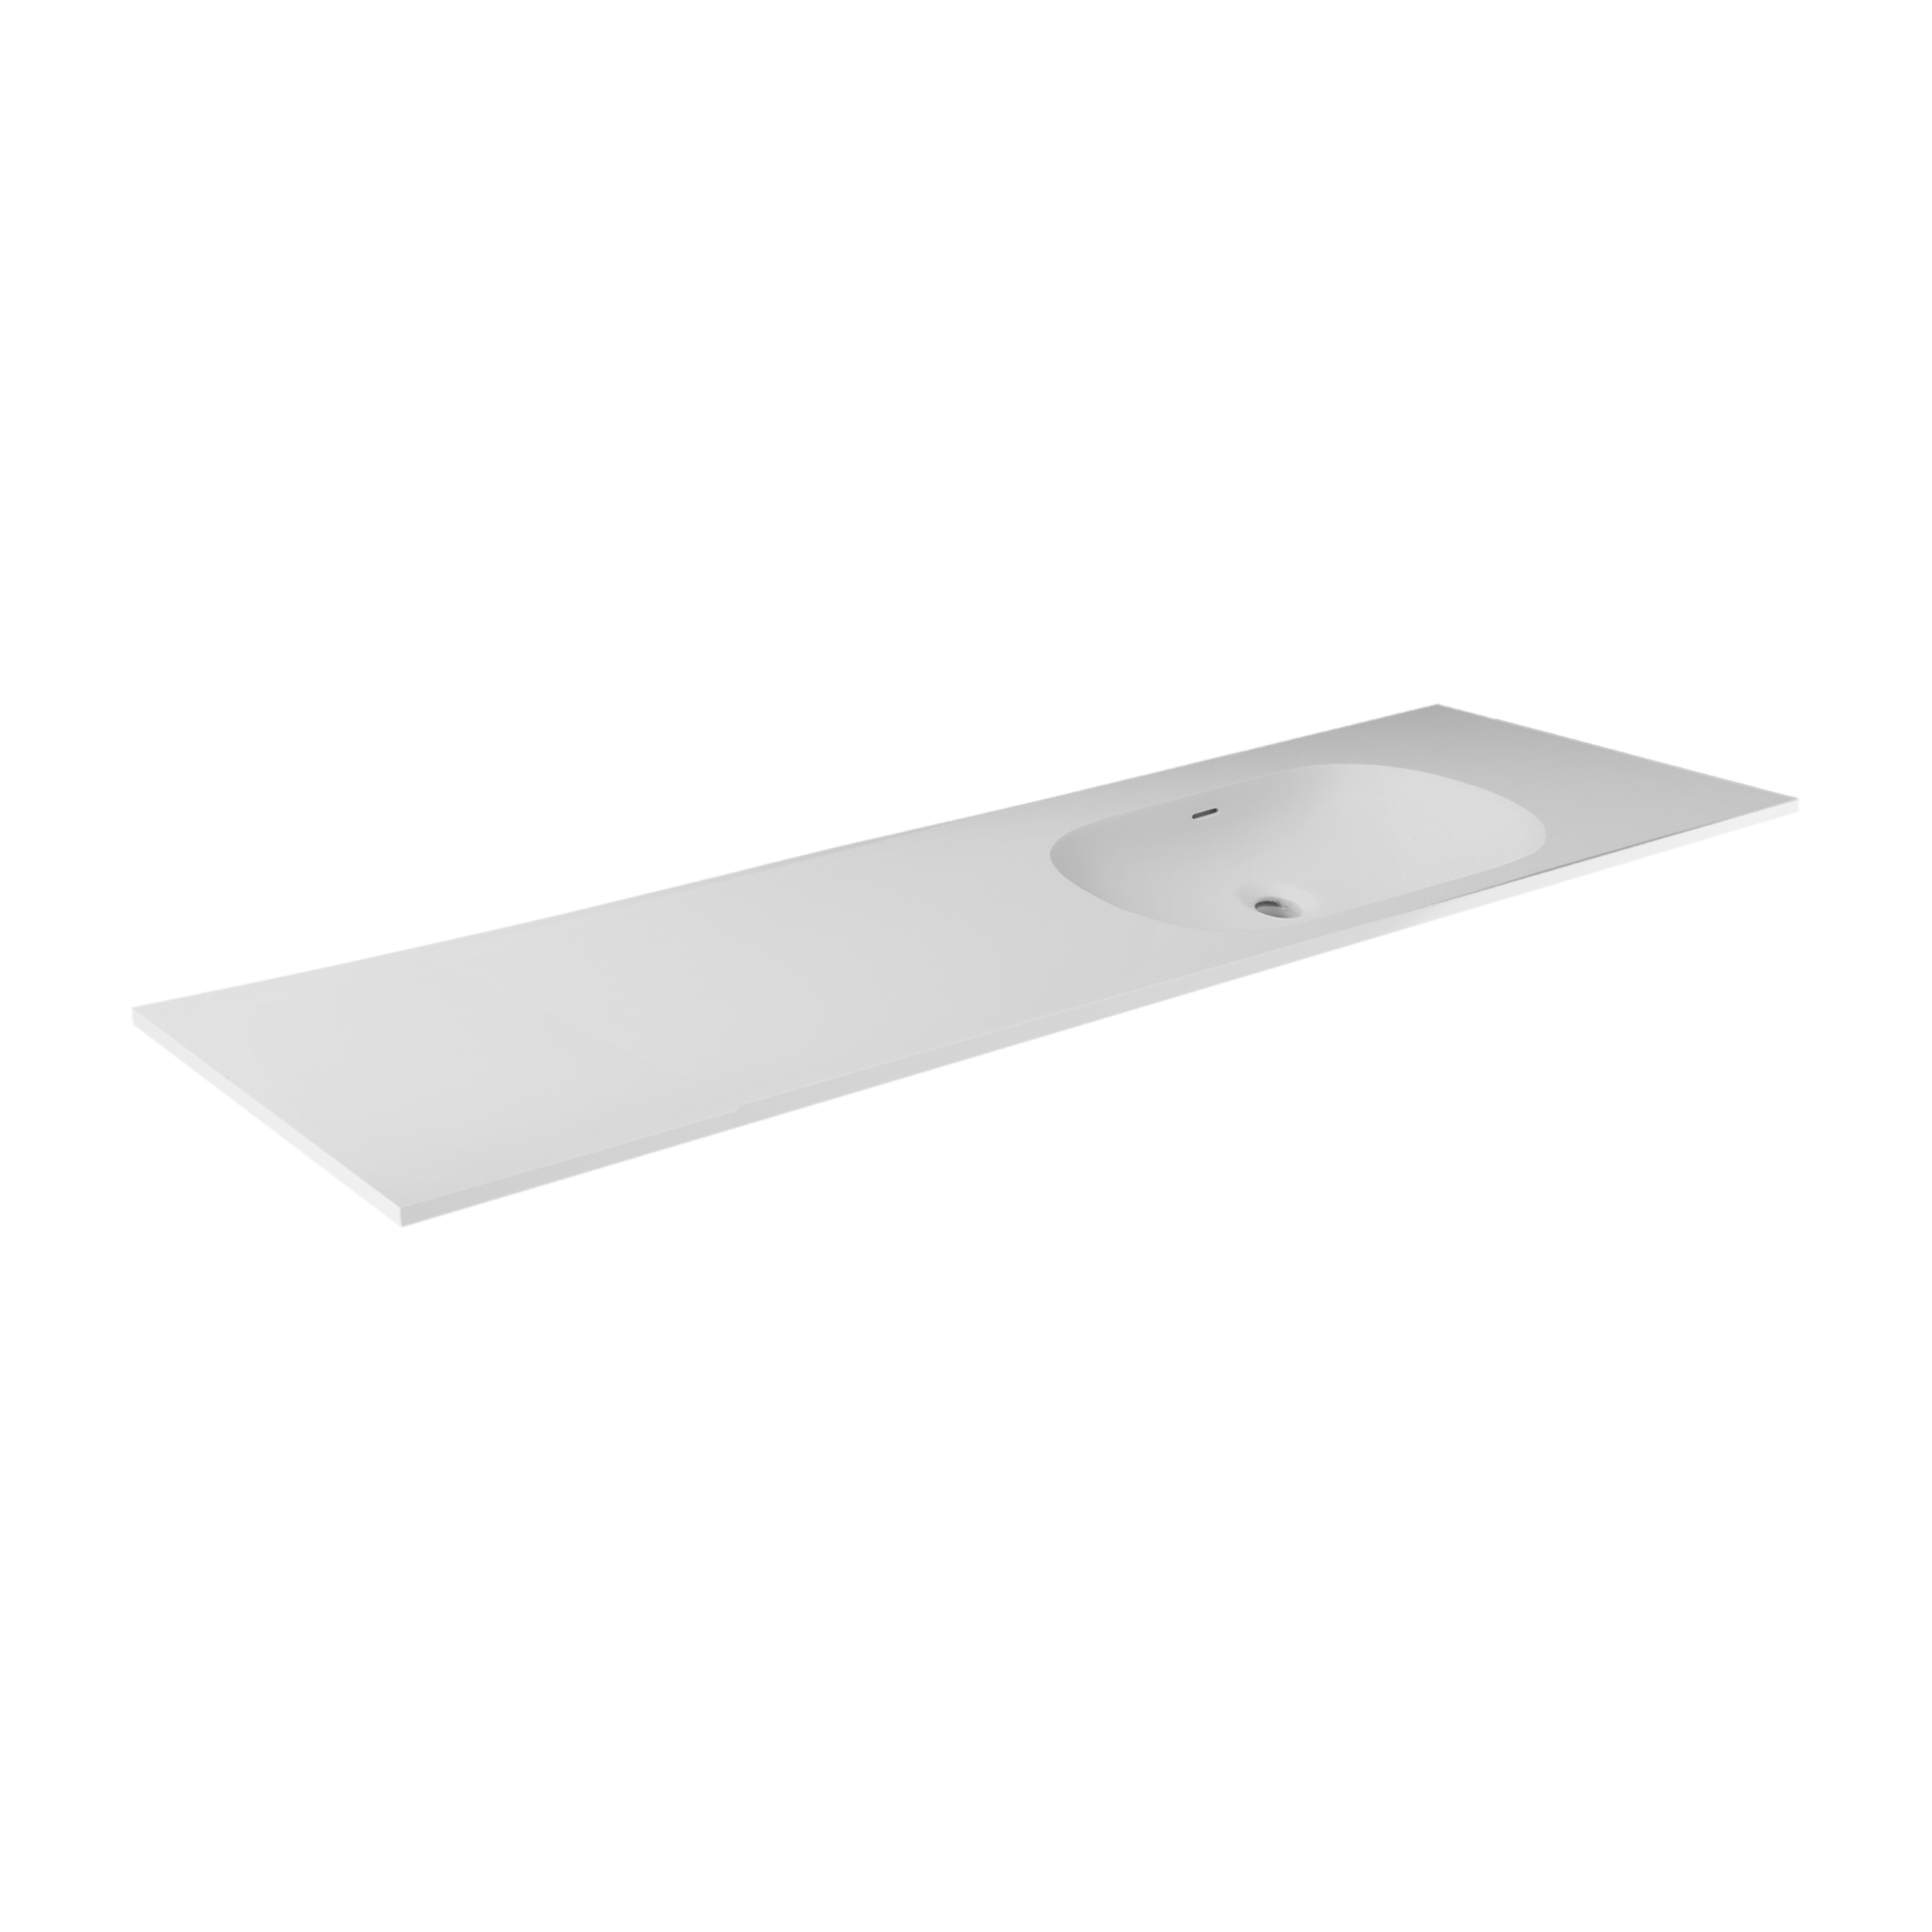 ELECAST OVALE VANITY TOP 1490X455X130MM SINGLE RIGHT BOWL NTH WHITE